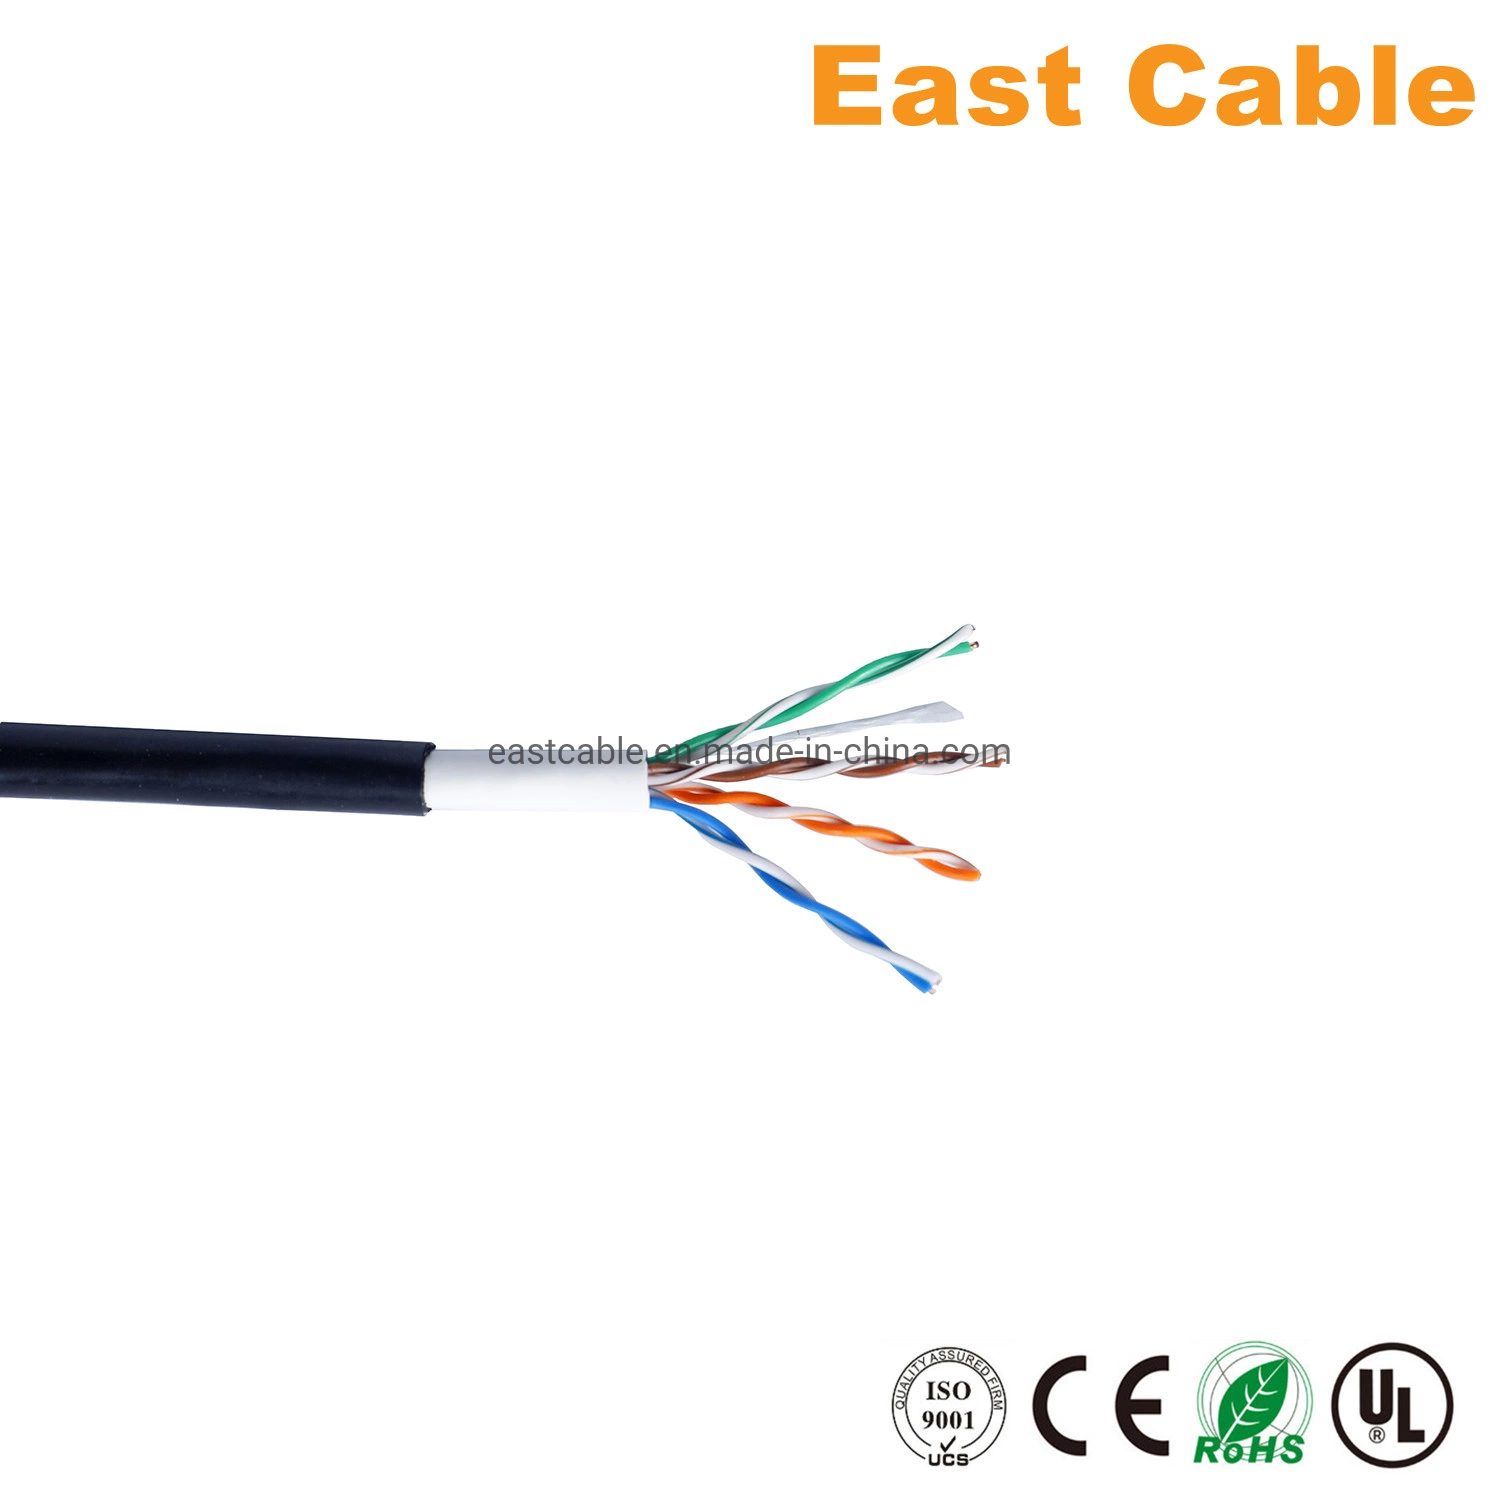 Network Cable Cat5/Cat5e/CAT6/Cat7/UTP/FTP/STP/SFTP Cable for Communication System